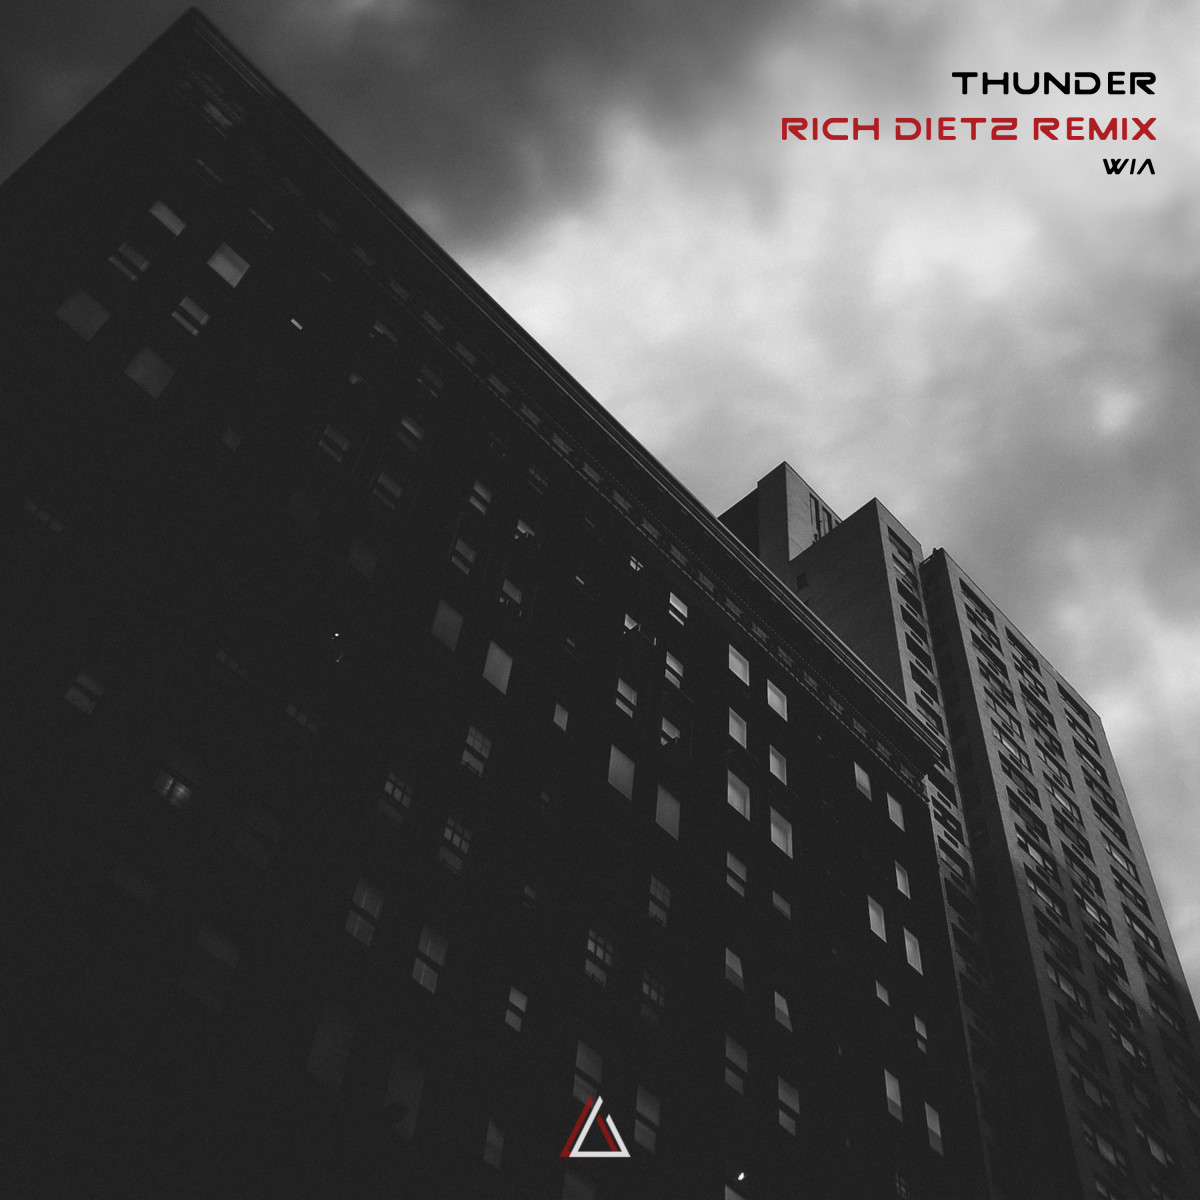 Cover art for Rich DietZ's remix of "Thunder."